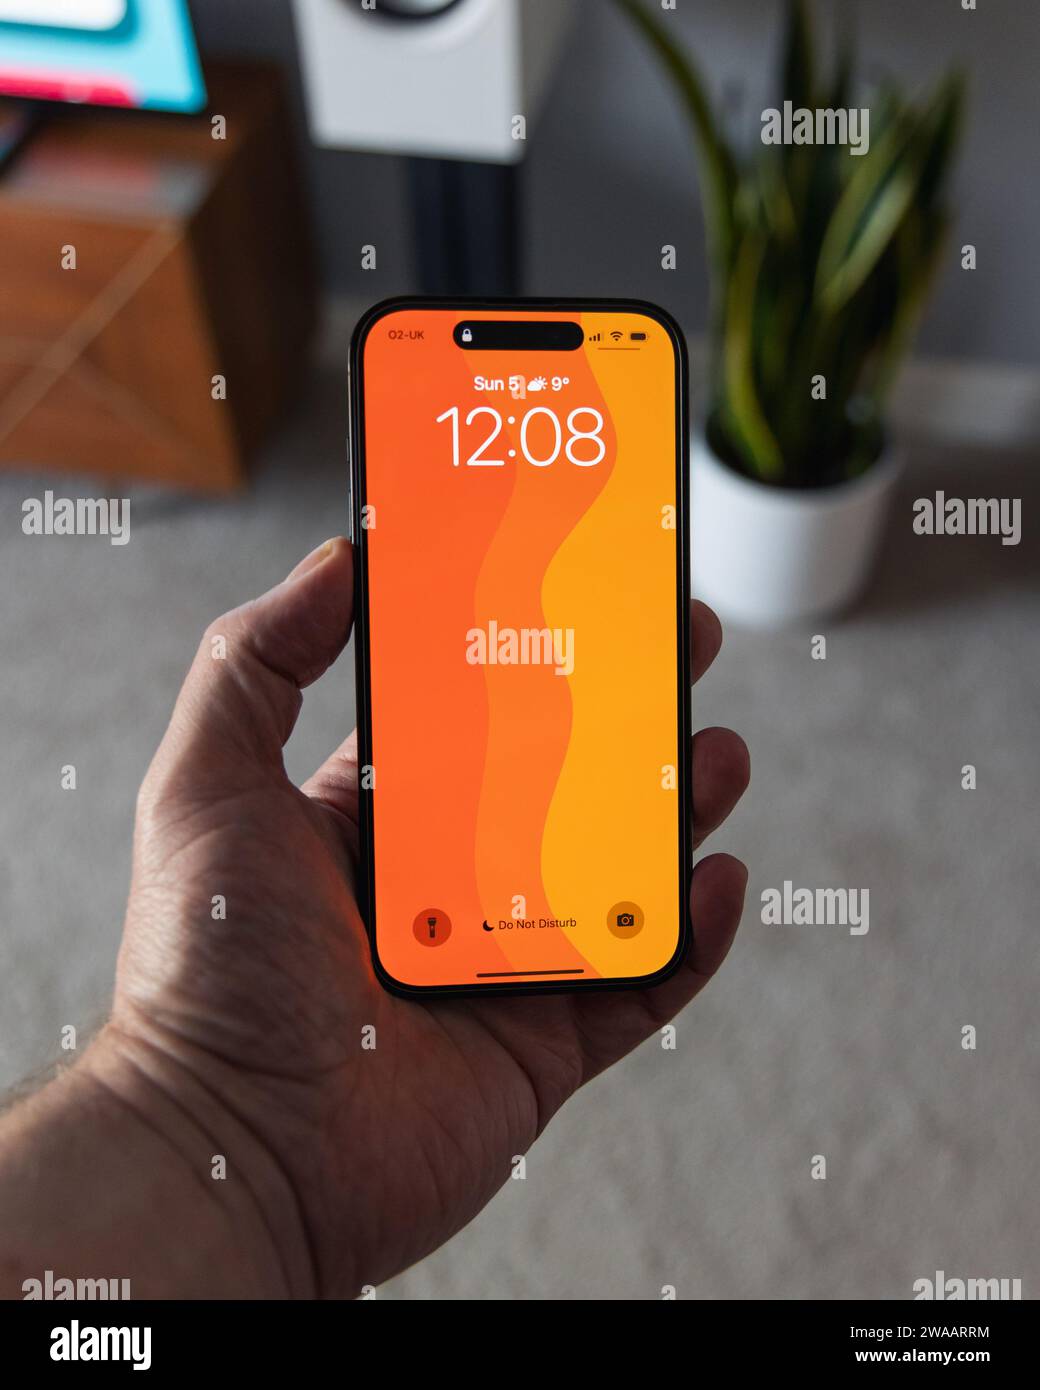 LONDON - NOVEMBER 05, 2023: Apple iPhone 14 Pro held in hand with bright orange color wallpaper on screen Stock Photo